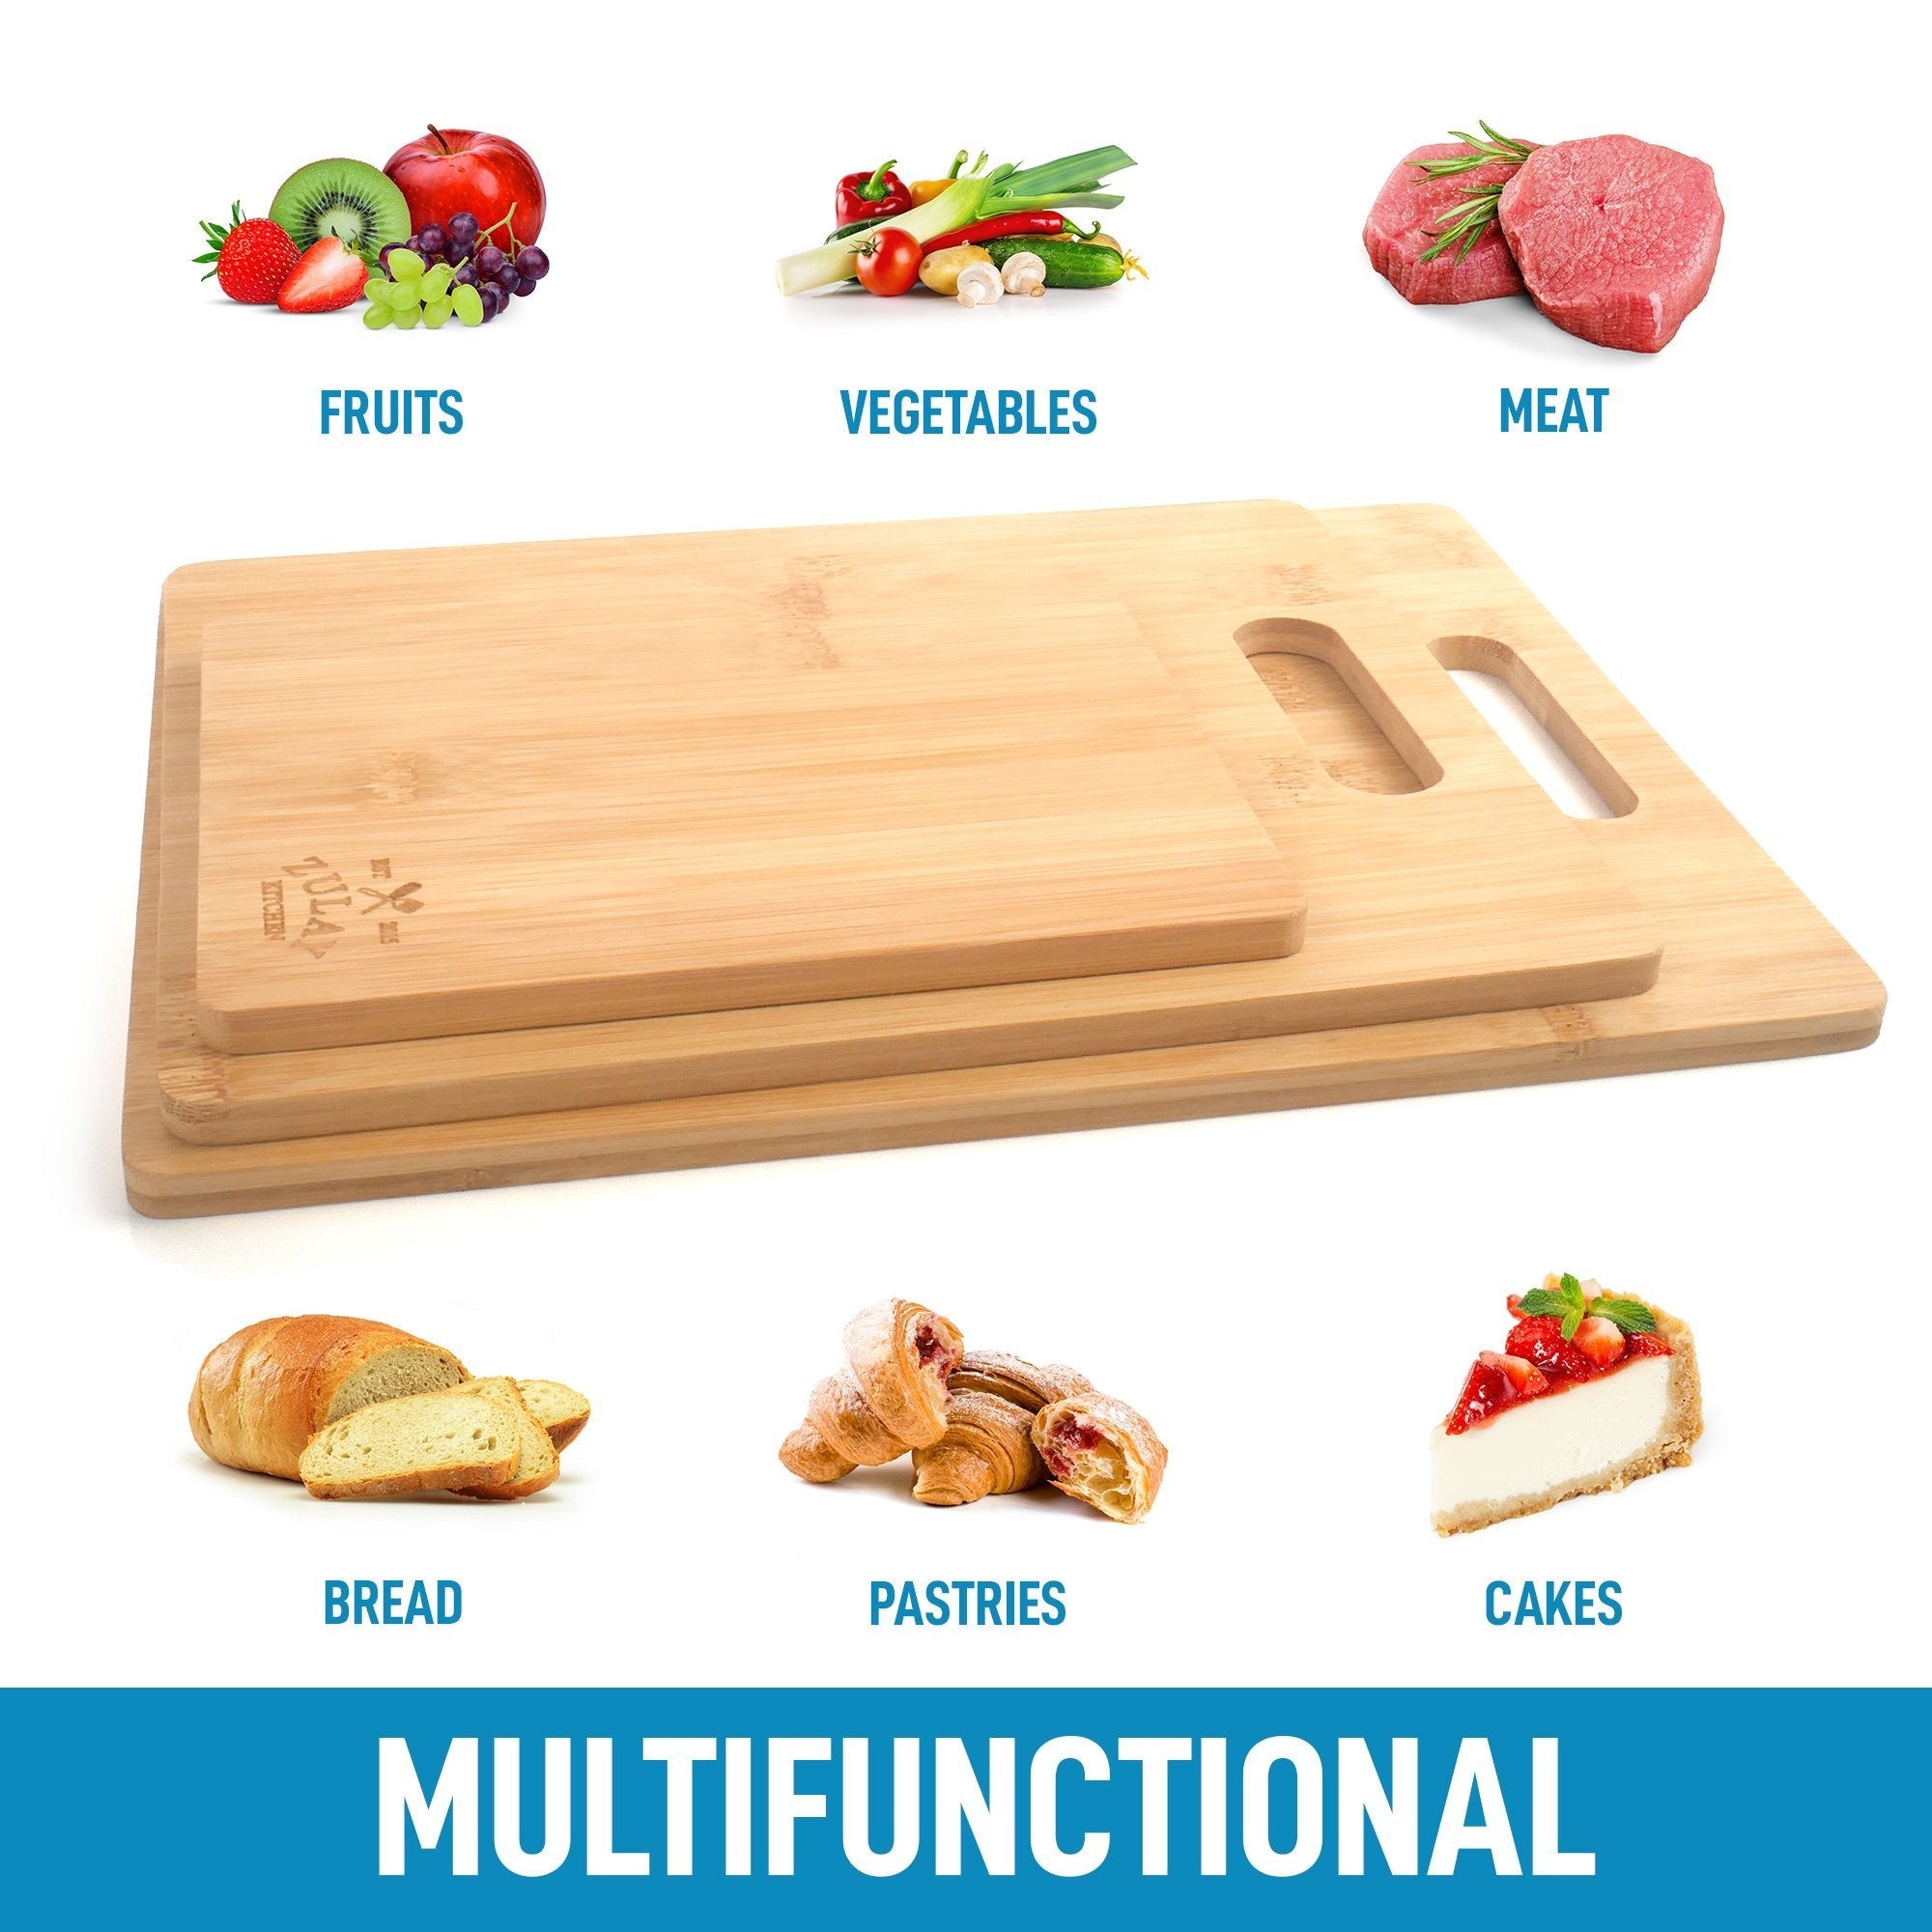 Bamboo Wooden Cutting Boards - 3 Assorted Sizes Online